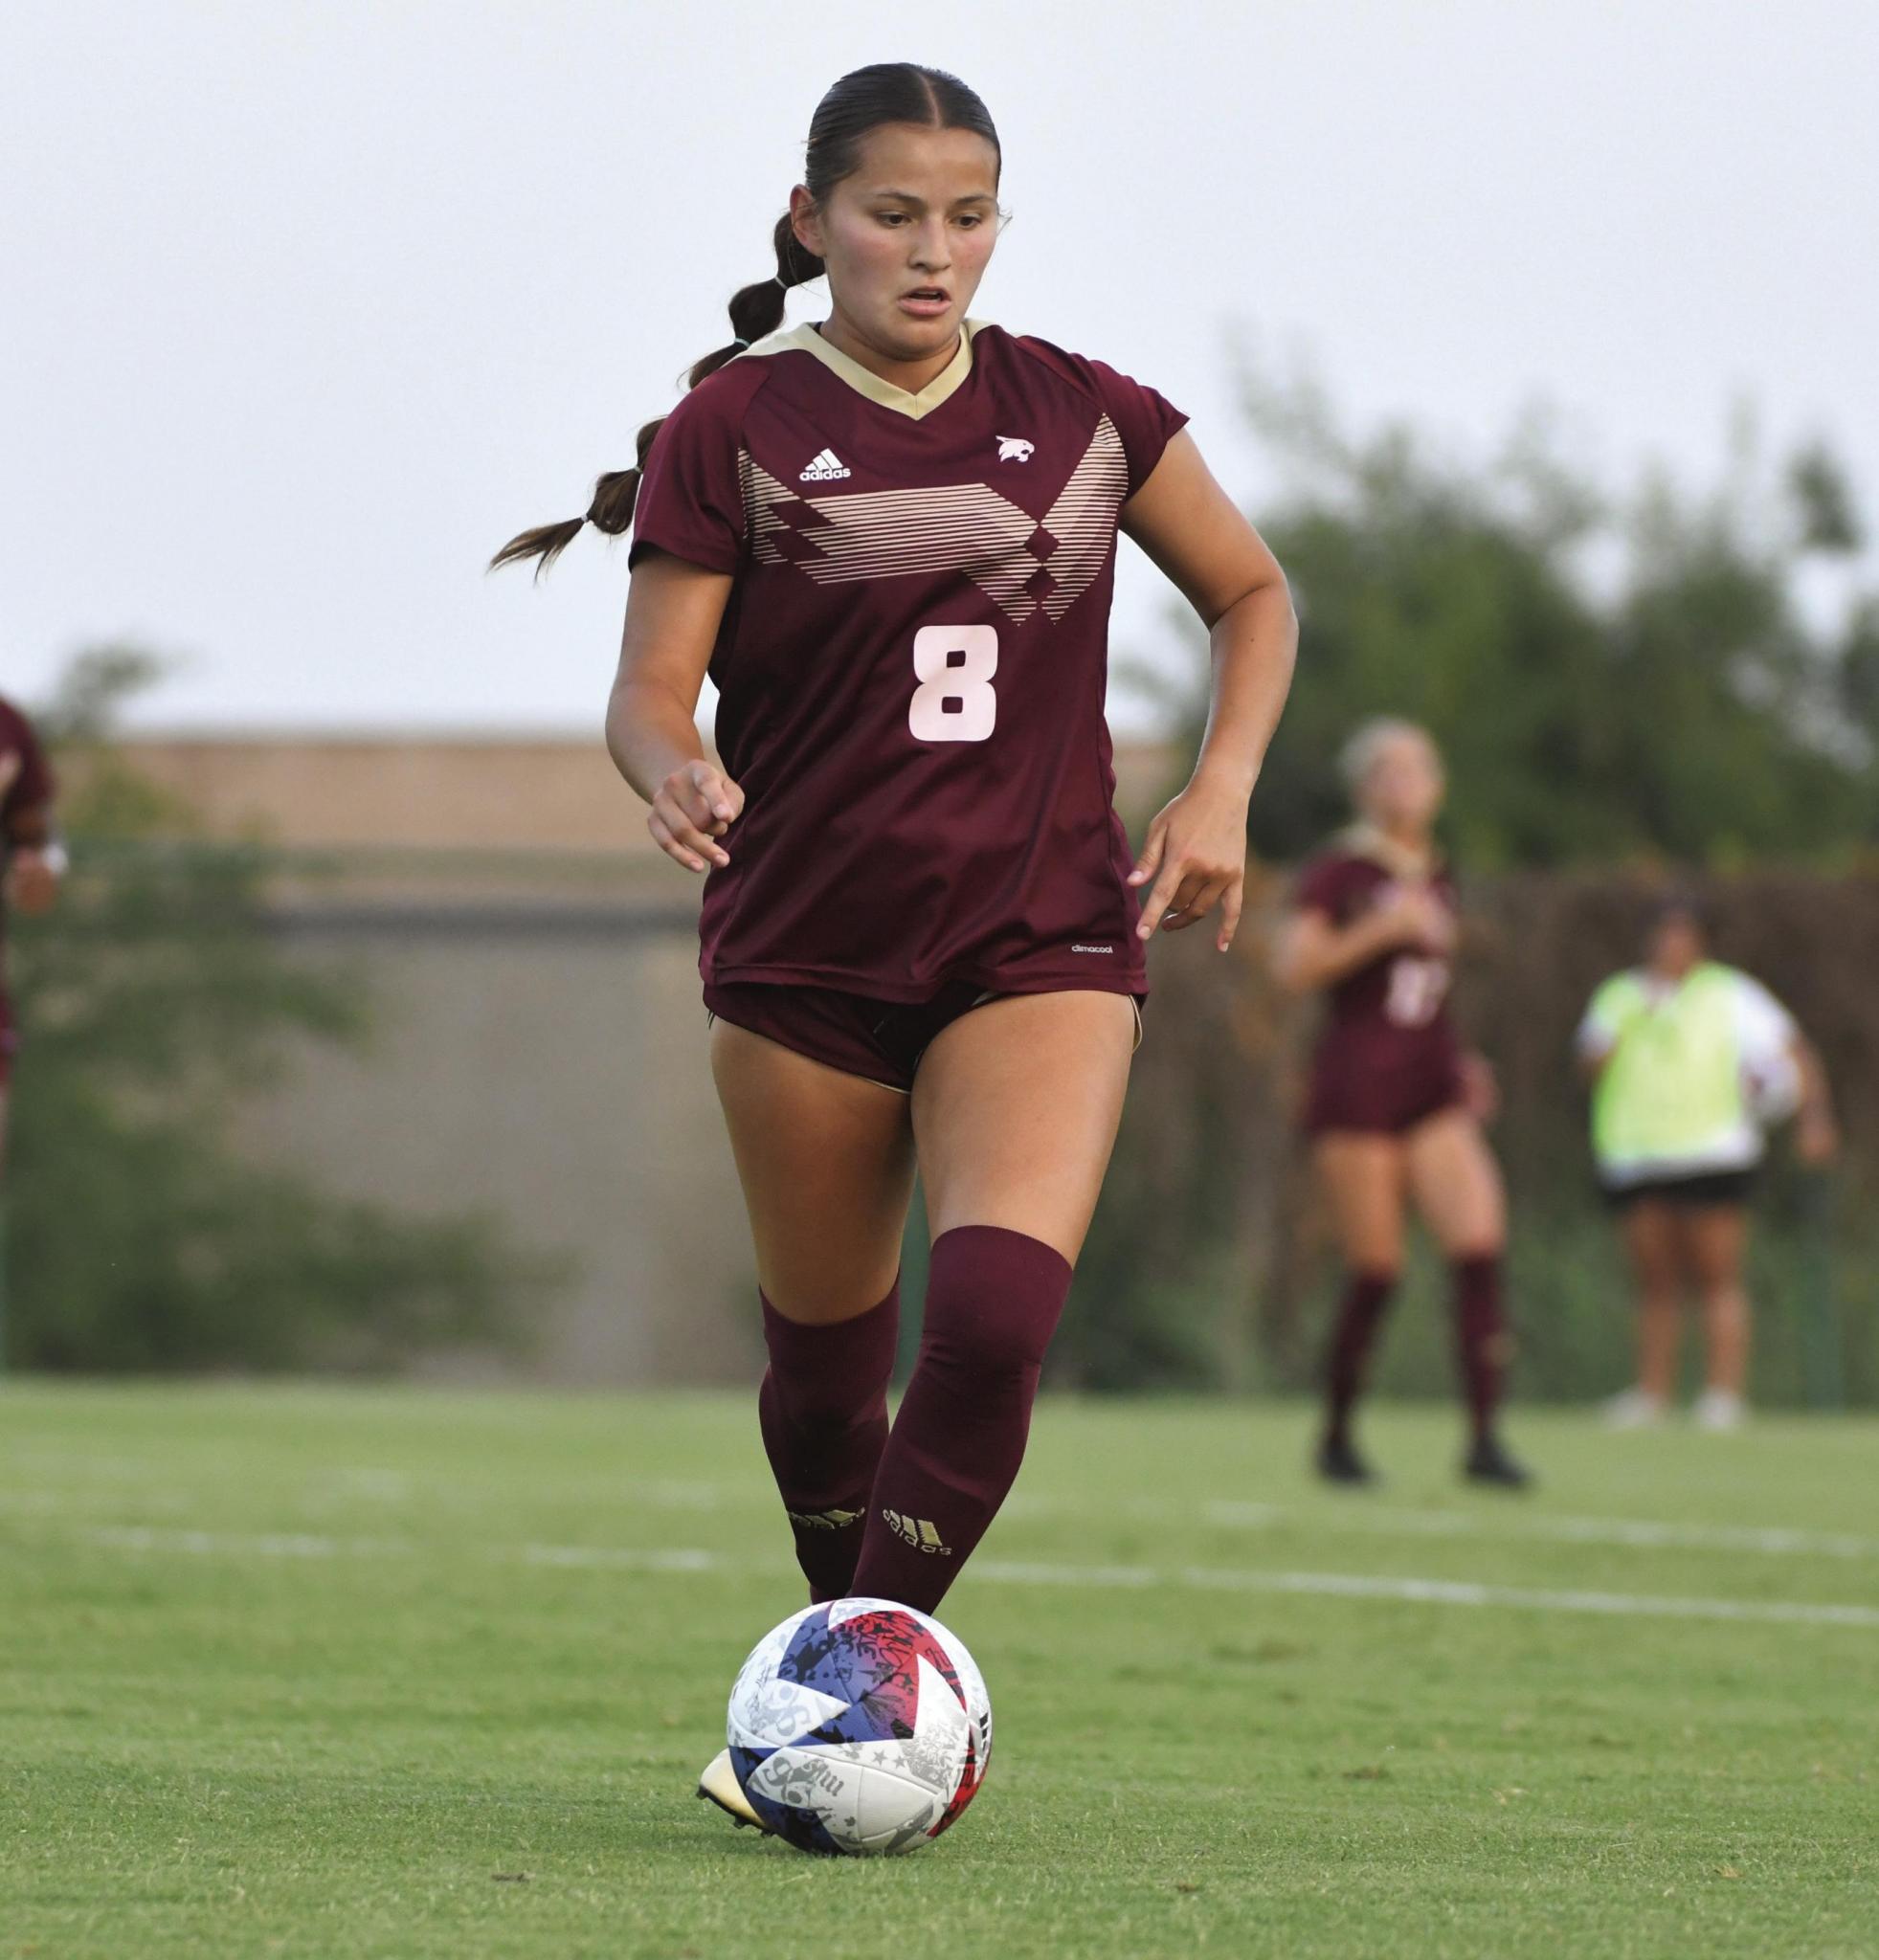 Bobcats fall to North Texas in 3-0 shutout